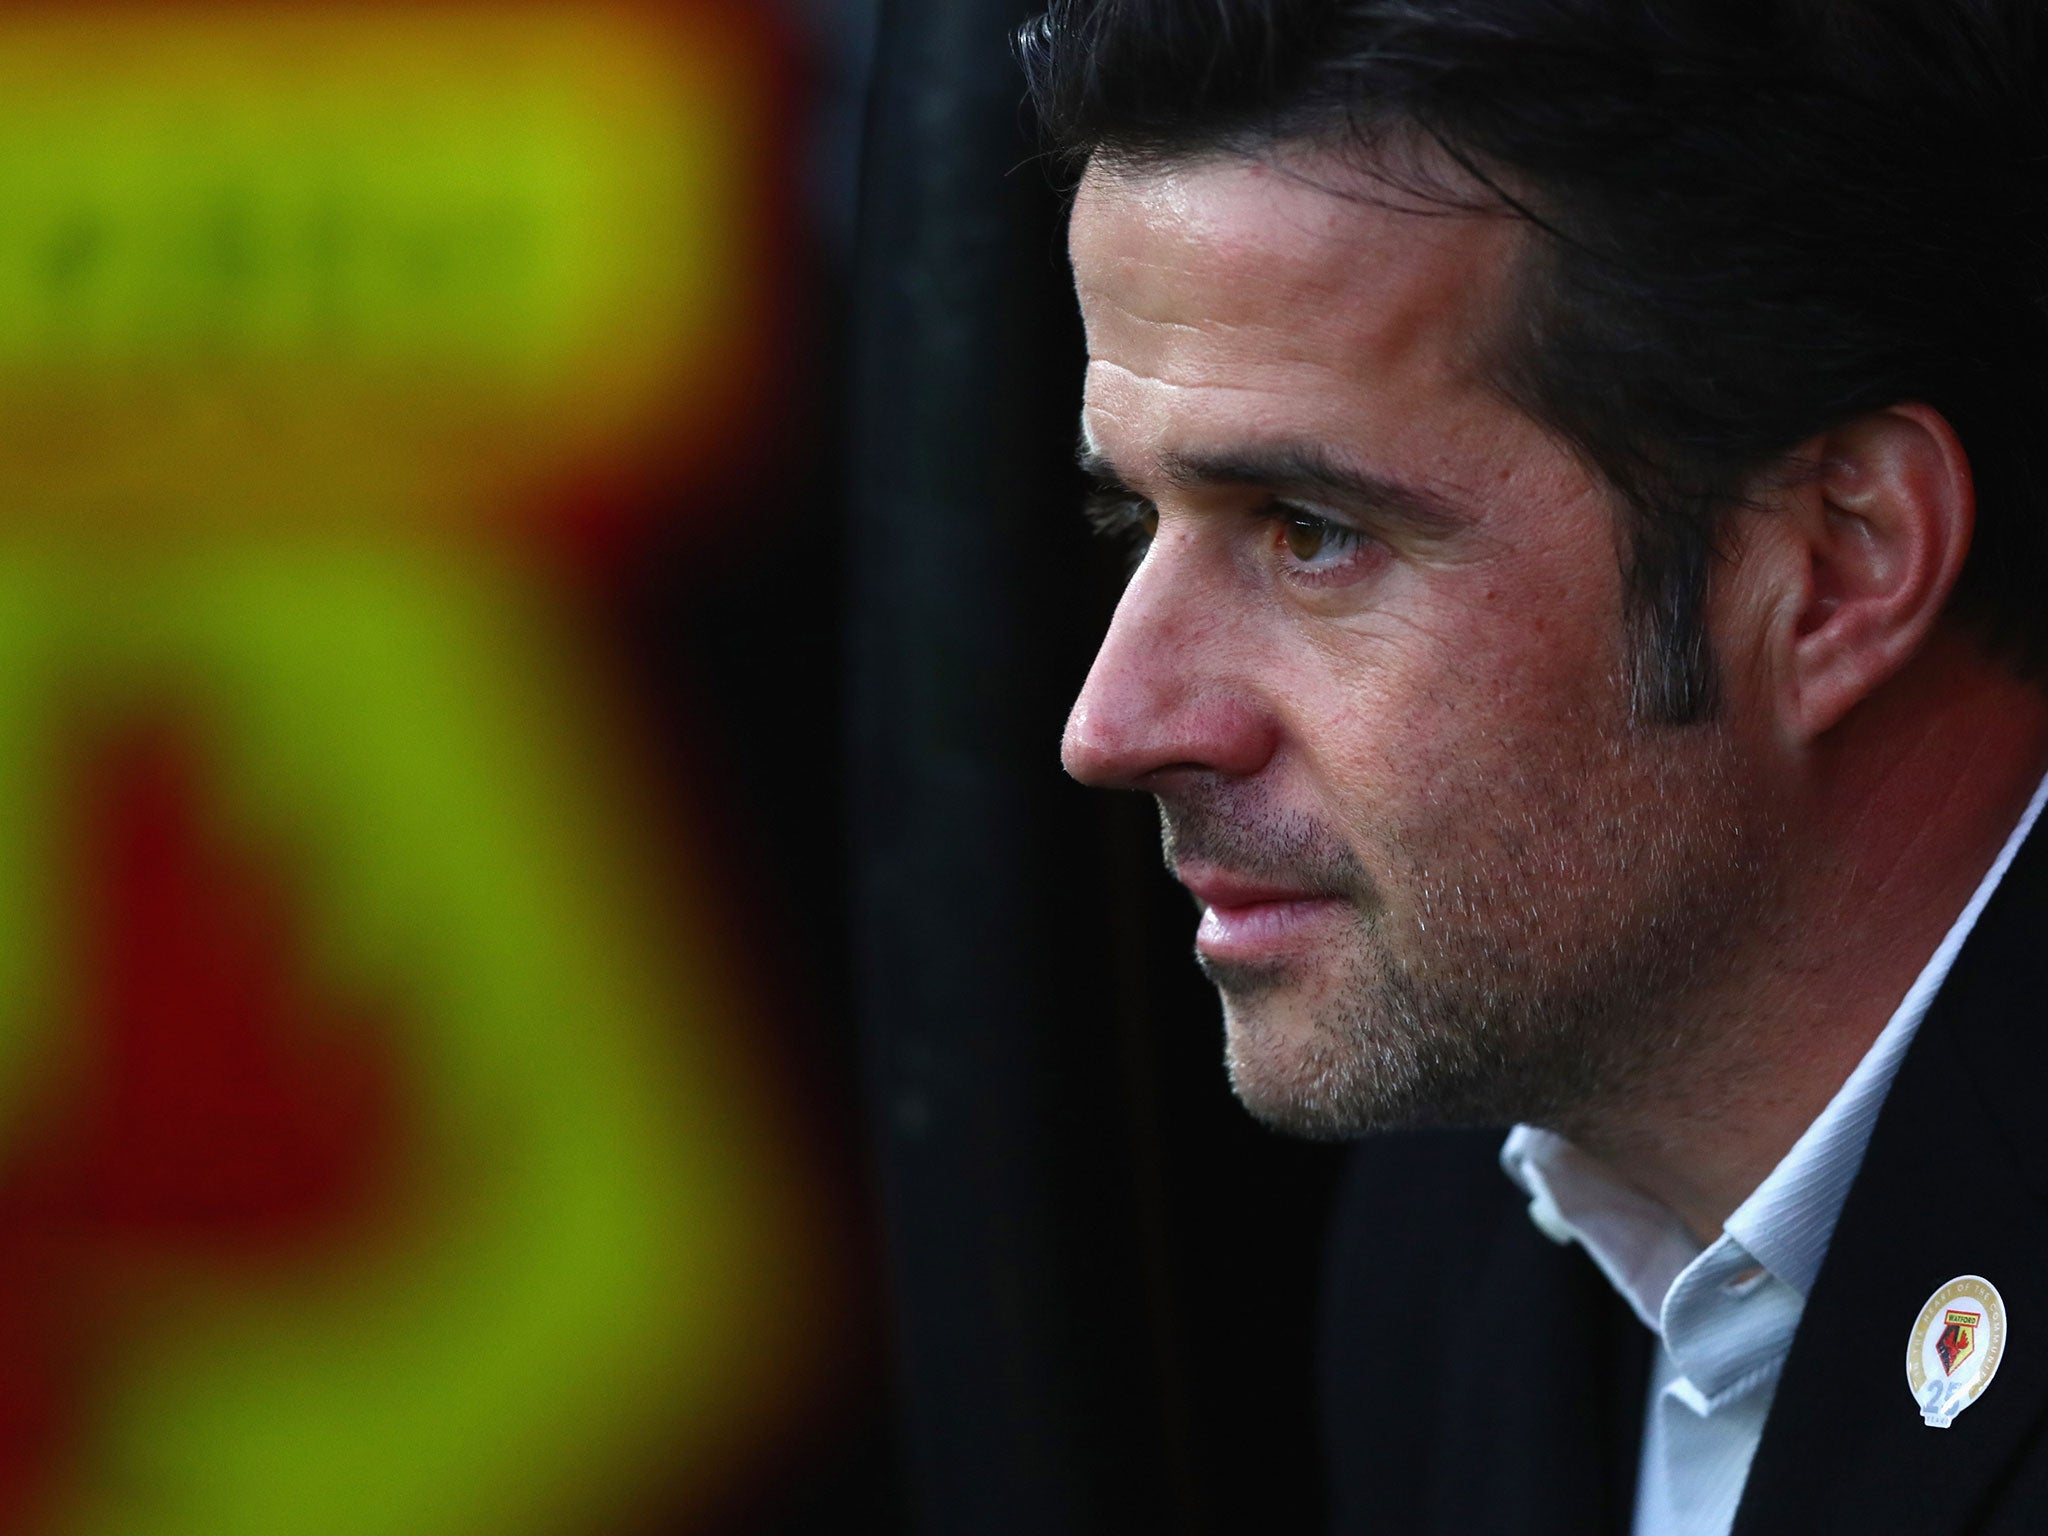 Marco Silva said he's only focused on Watford's next game against United